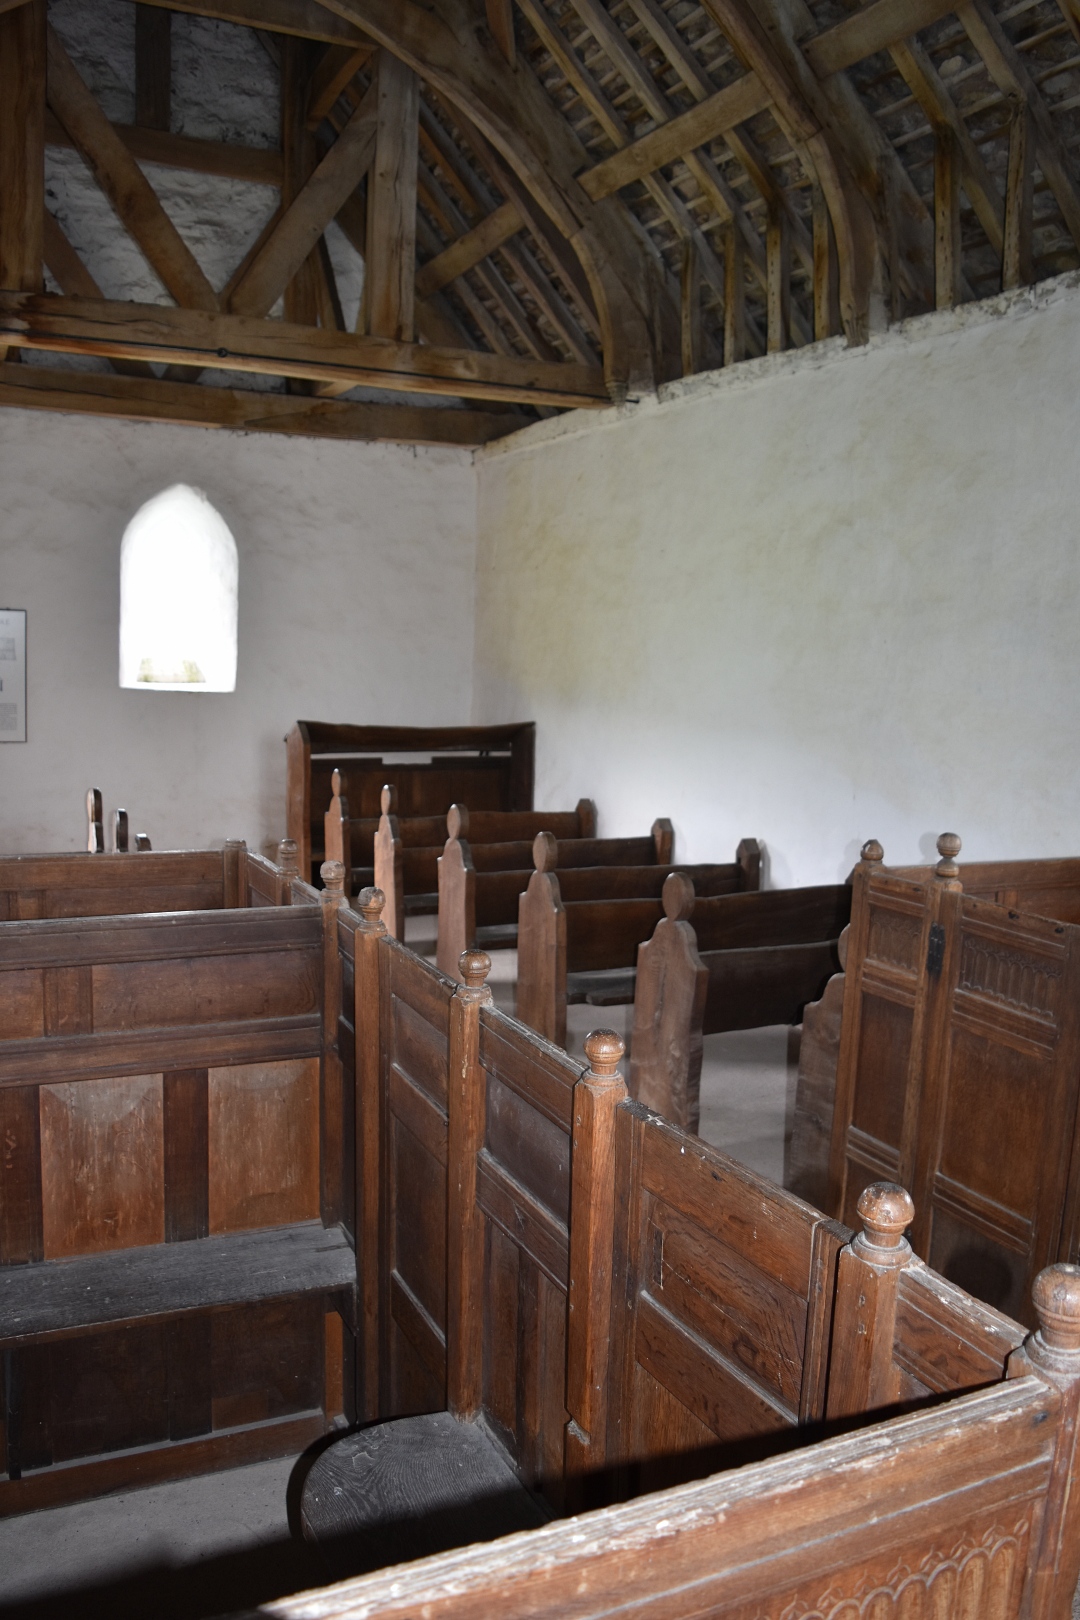 View from the Pulpit in Langley Chapel showing the Box Pews, Benches, and Music Stand.